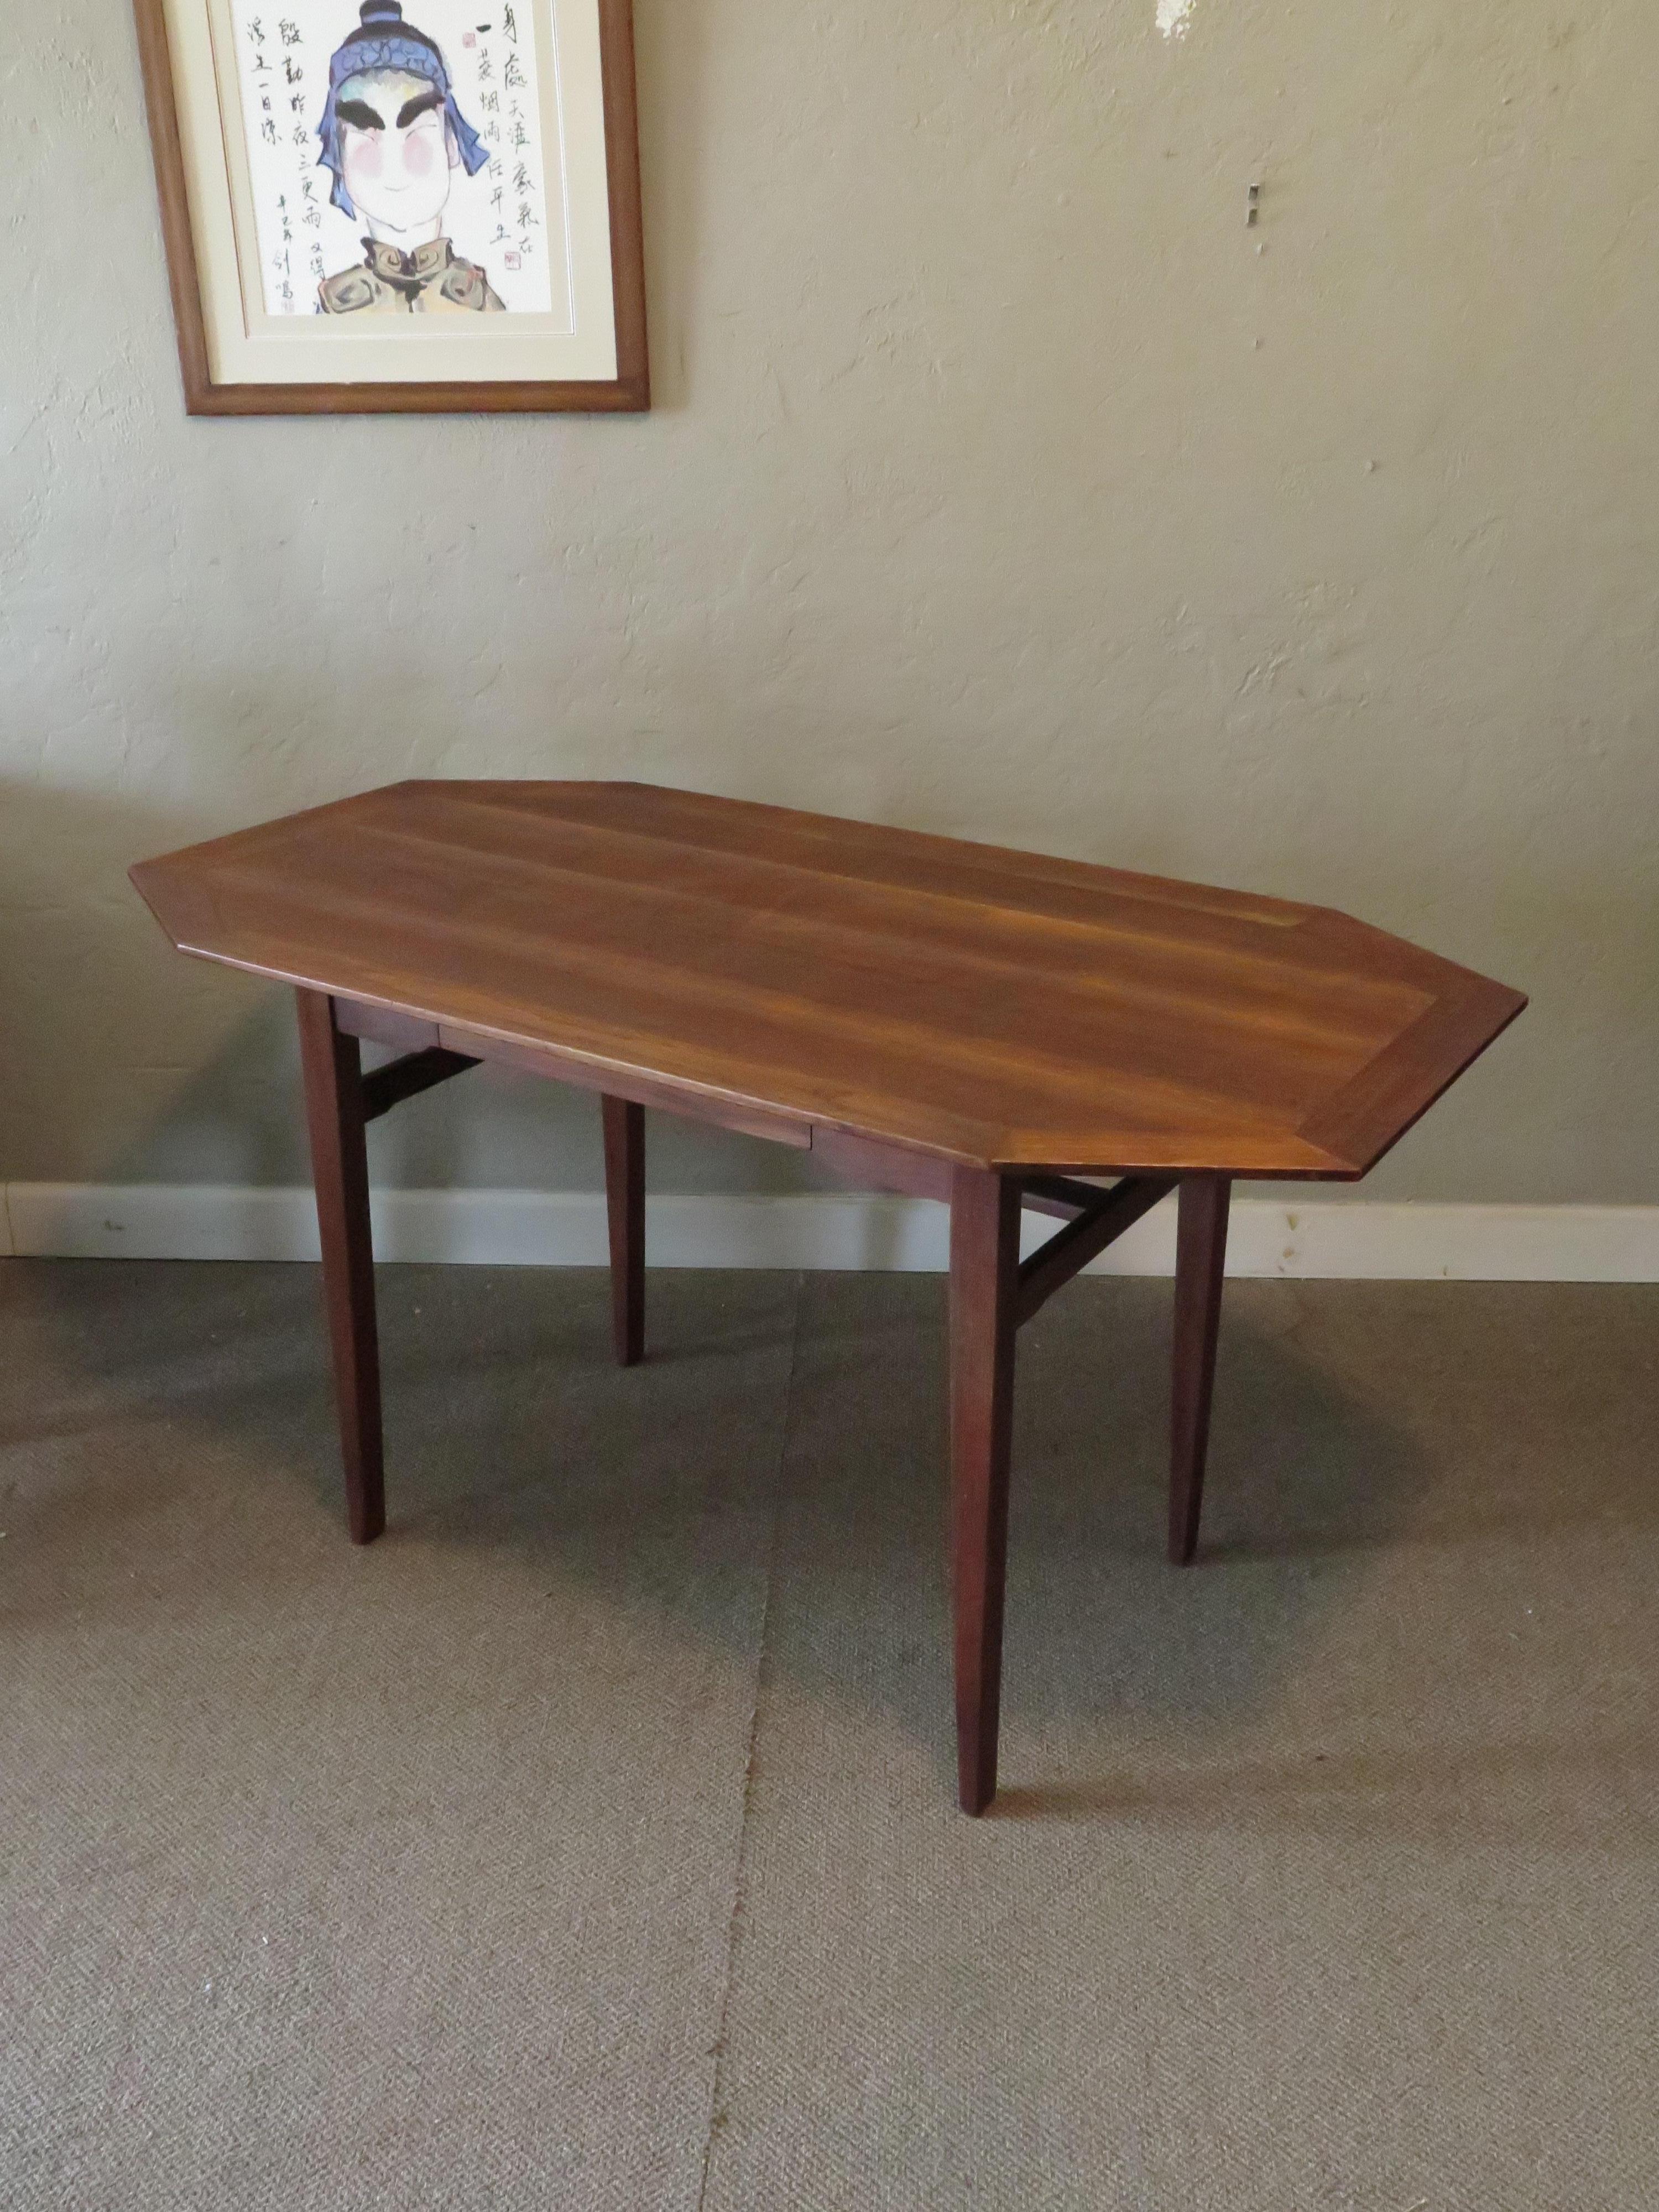 Beautiful and rare walnut desk designed by Edward Wormley, manufactured by Dunbar ca' 1950's. Single drawer, dark walnut original finish, with nice graining. Edges are raised to give it a floating effect.